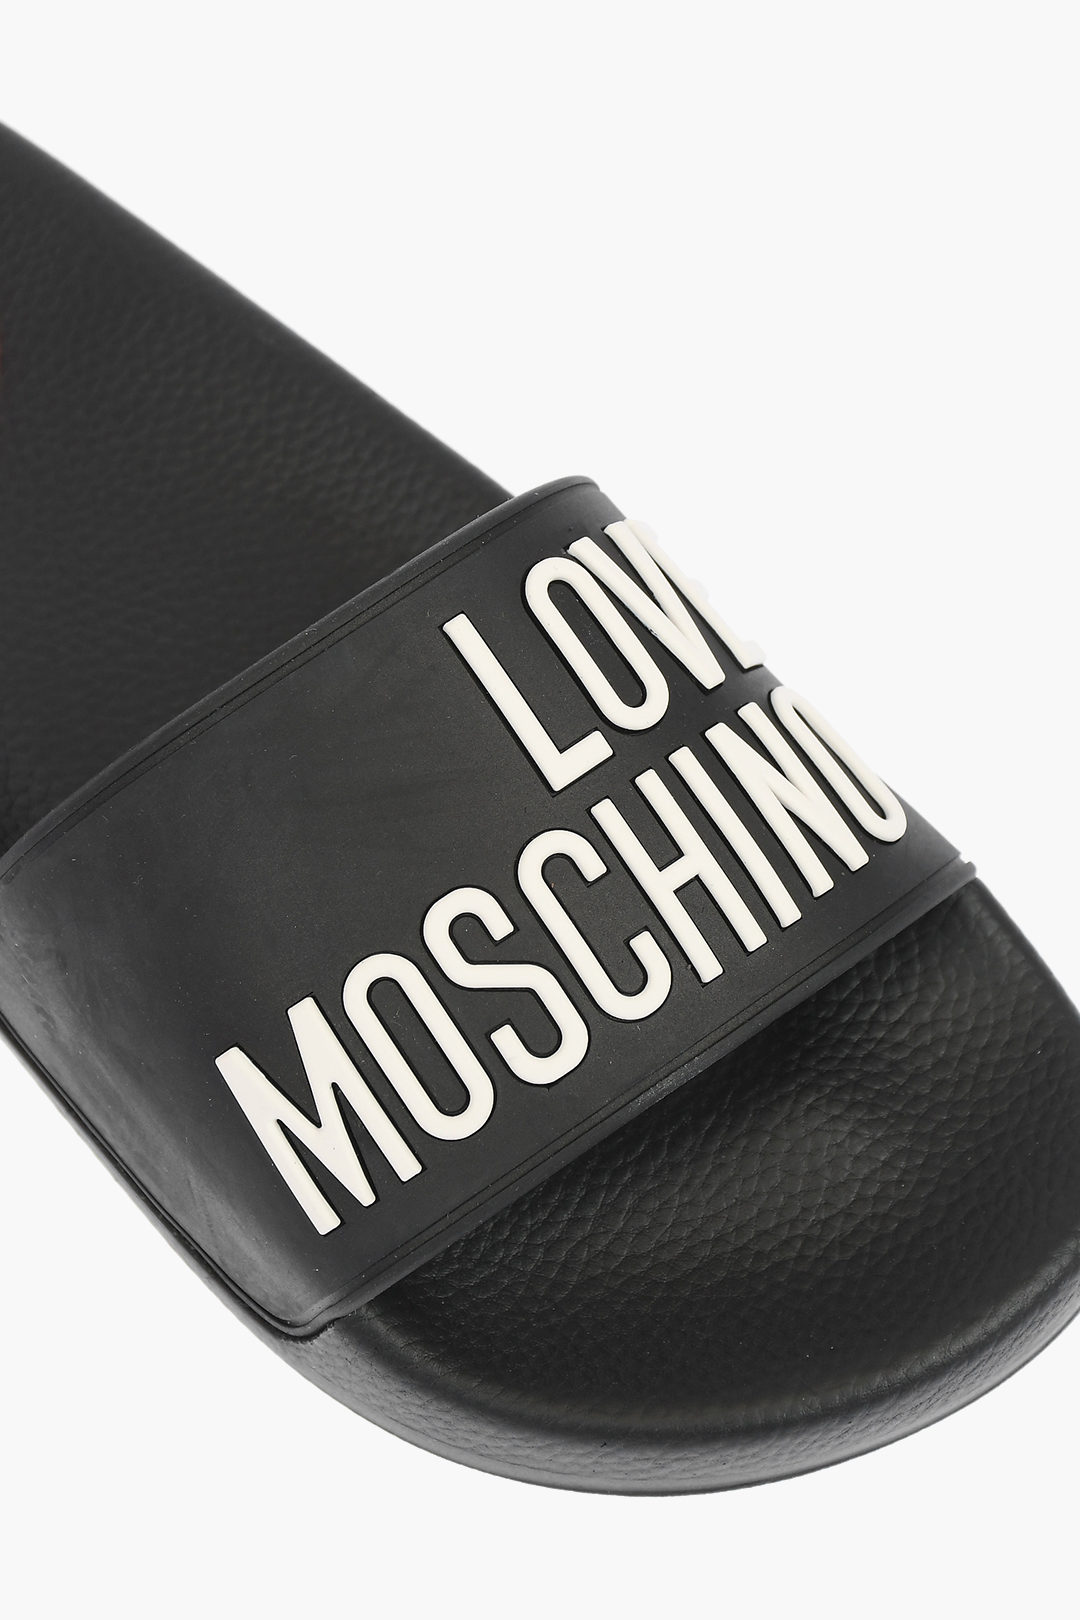 Moschino LOVE rubber slides with logo women - Glamood Outlet